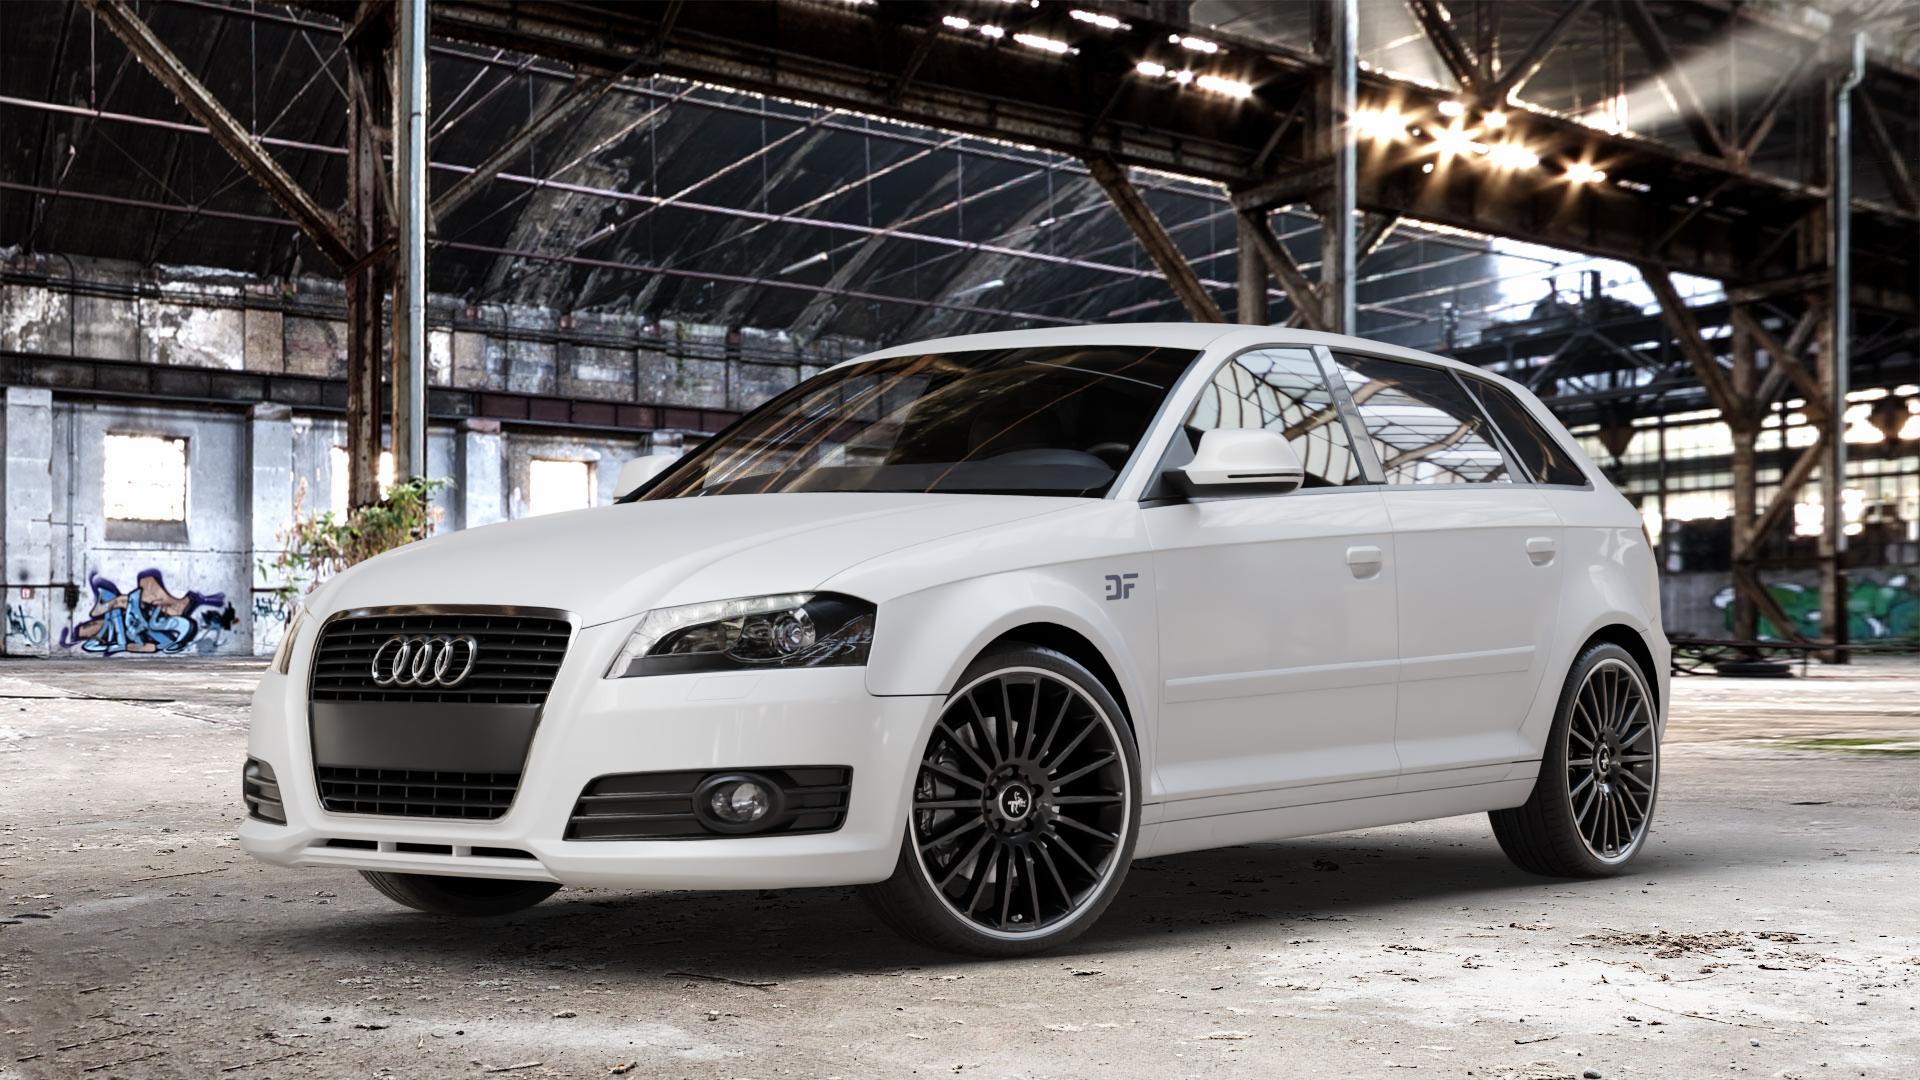 Audi - A3 Type 8P Wheels and Tyre Packages